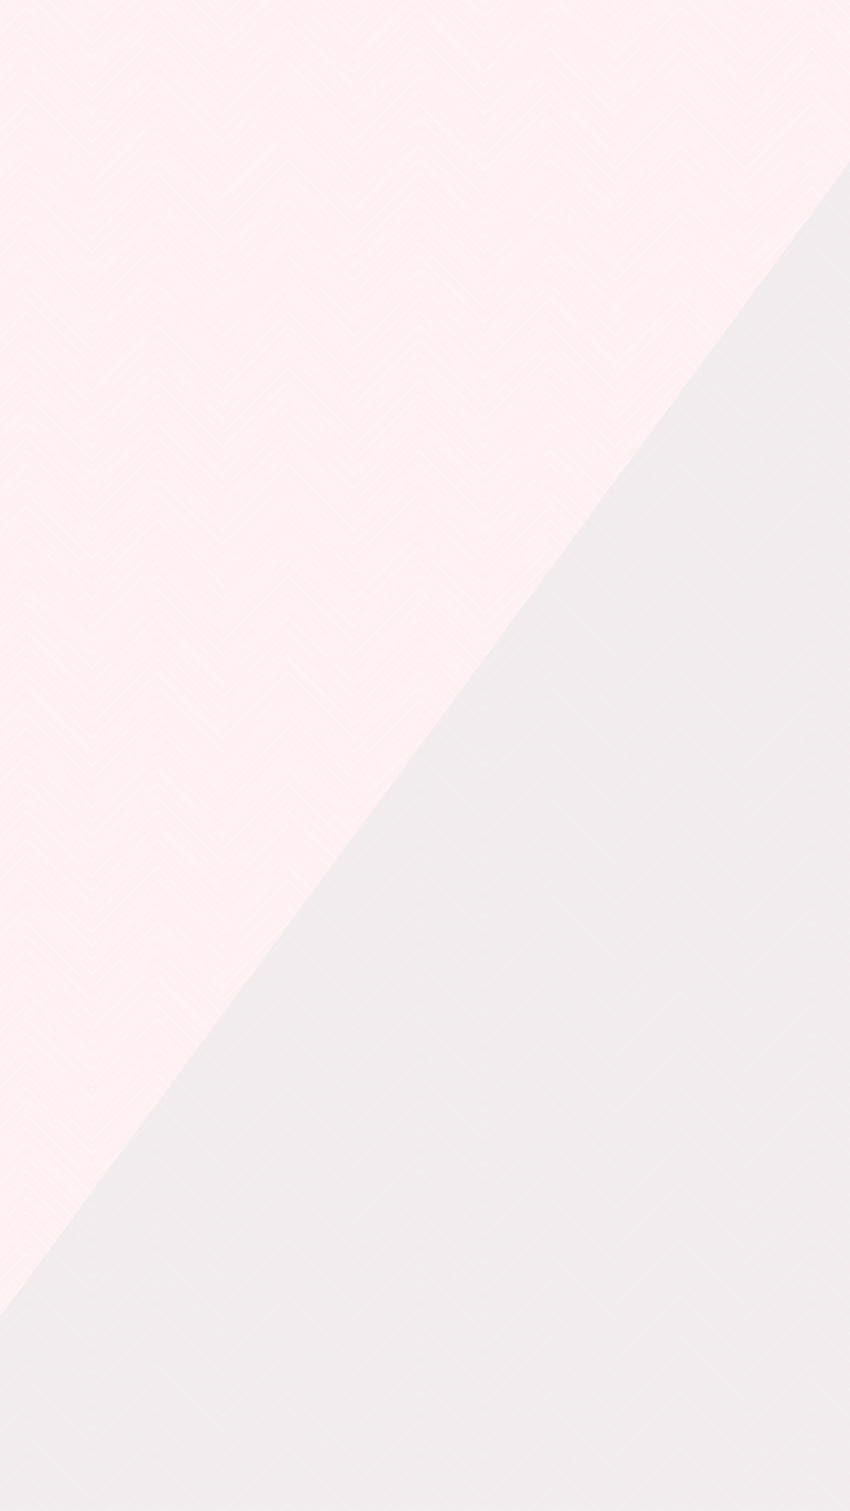 Color Block iPhone - Meadow Sweet Lane, Pink and Gray HD phone wallpaper